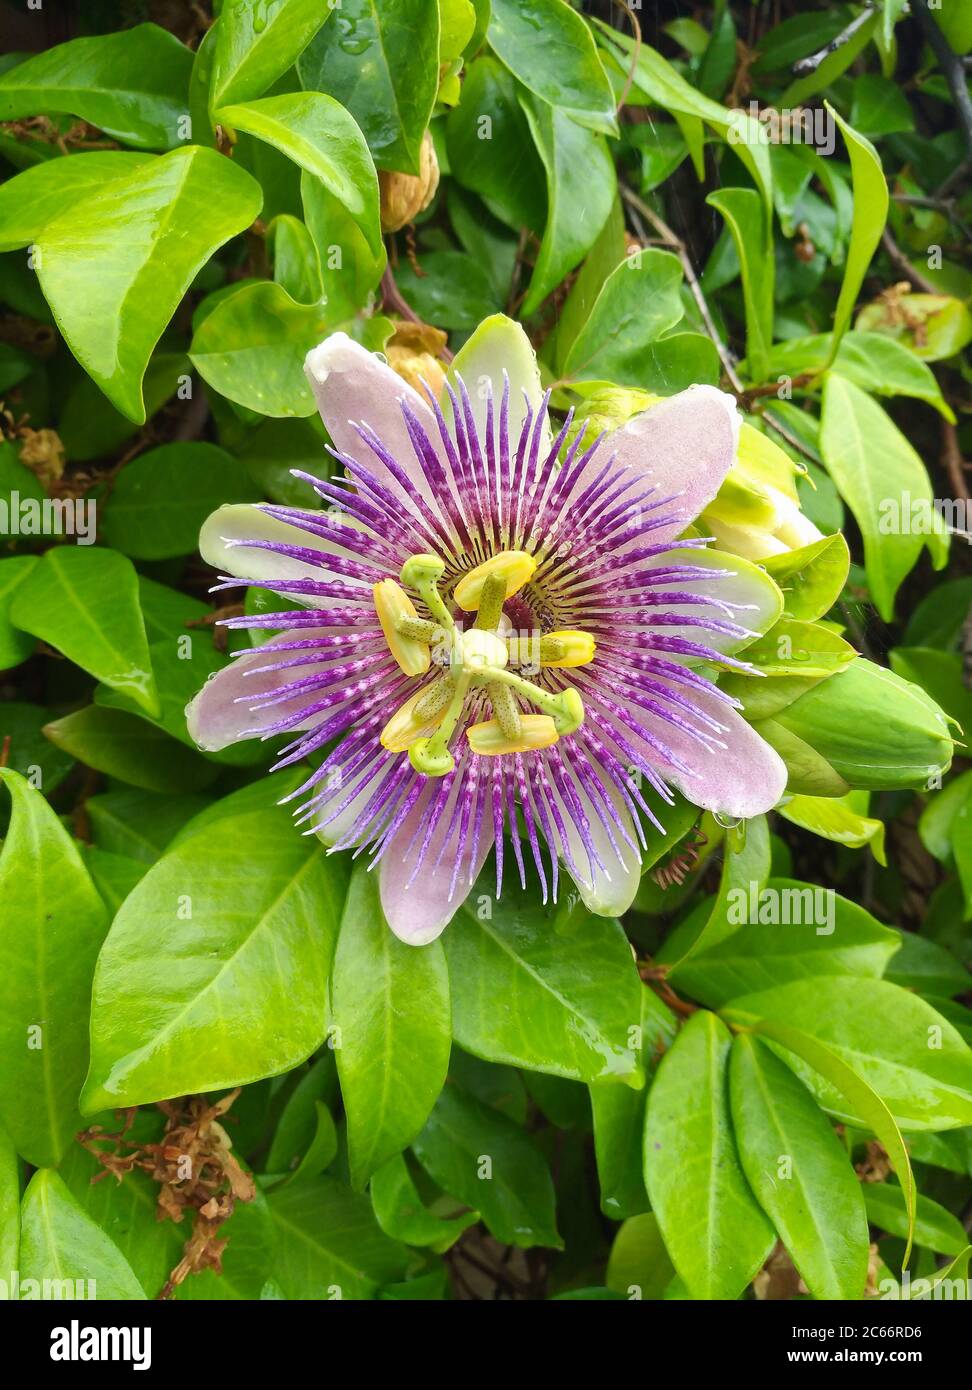 Passiflora violet  flower ijn the garden with green leaves Stock Photo